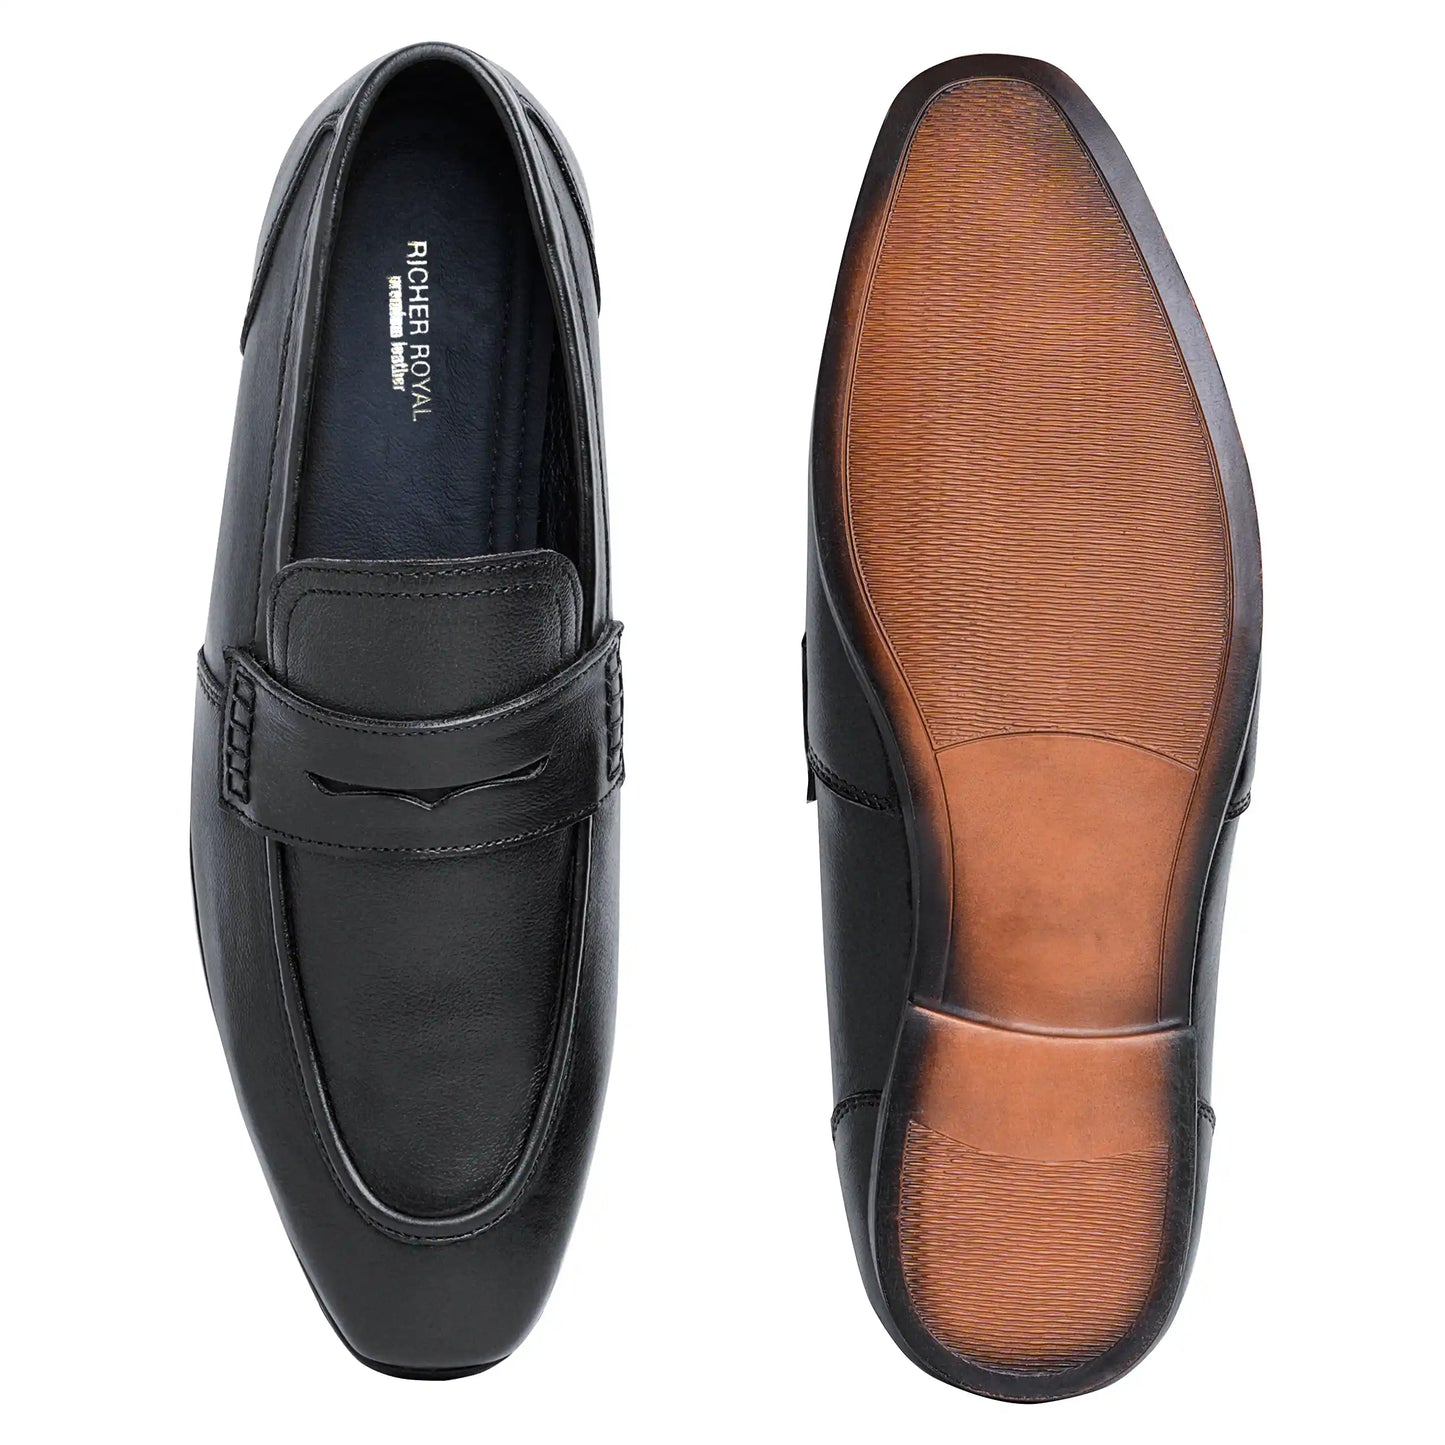 Men Loafers Pure Leather Slip On Shoes